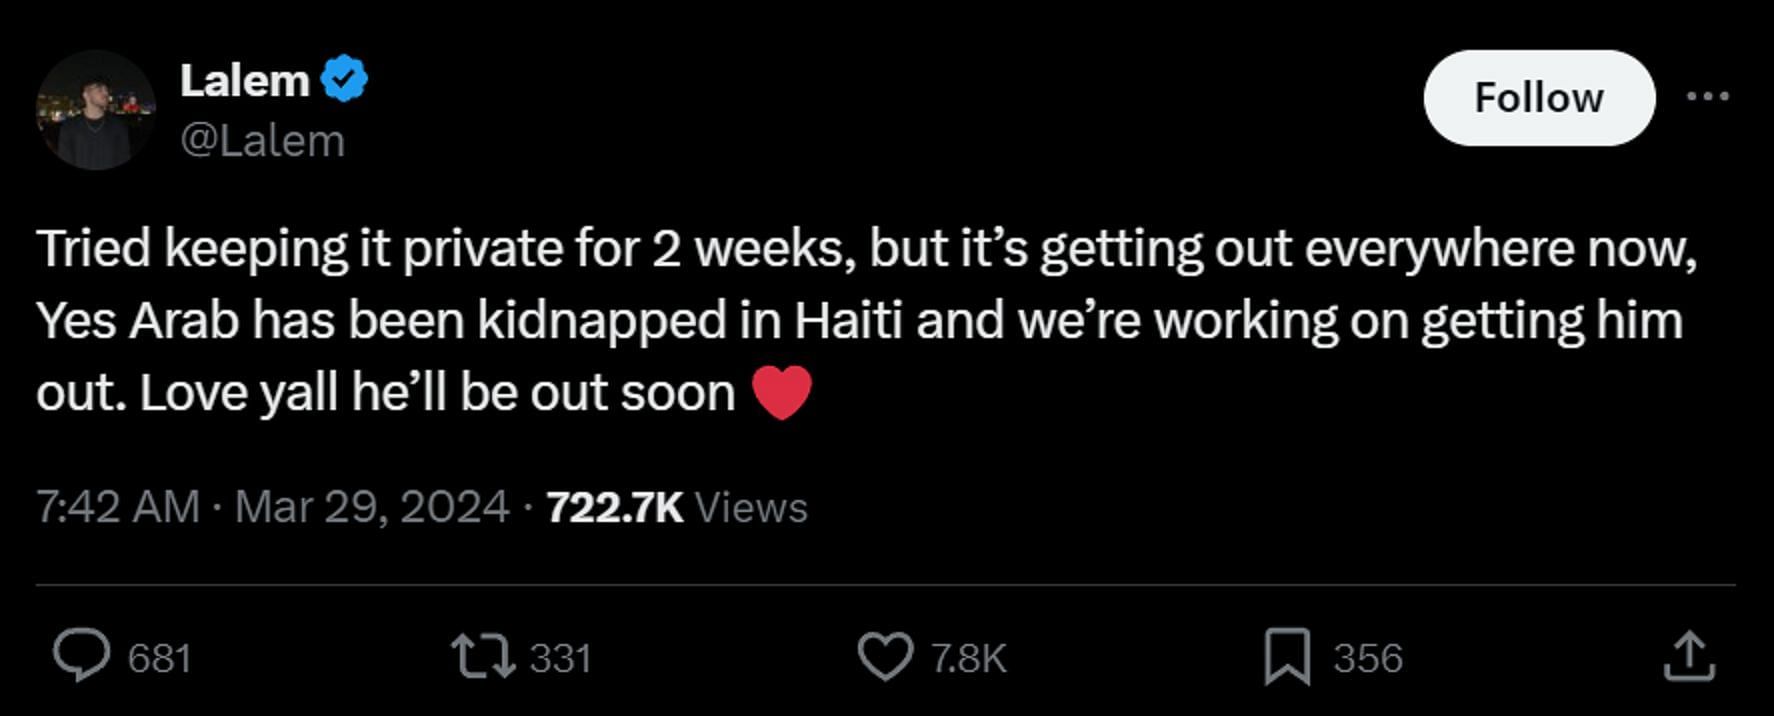 Lalem confirms that Arab had been kidnapped in Haiti. (Image via X)